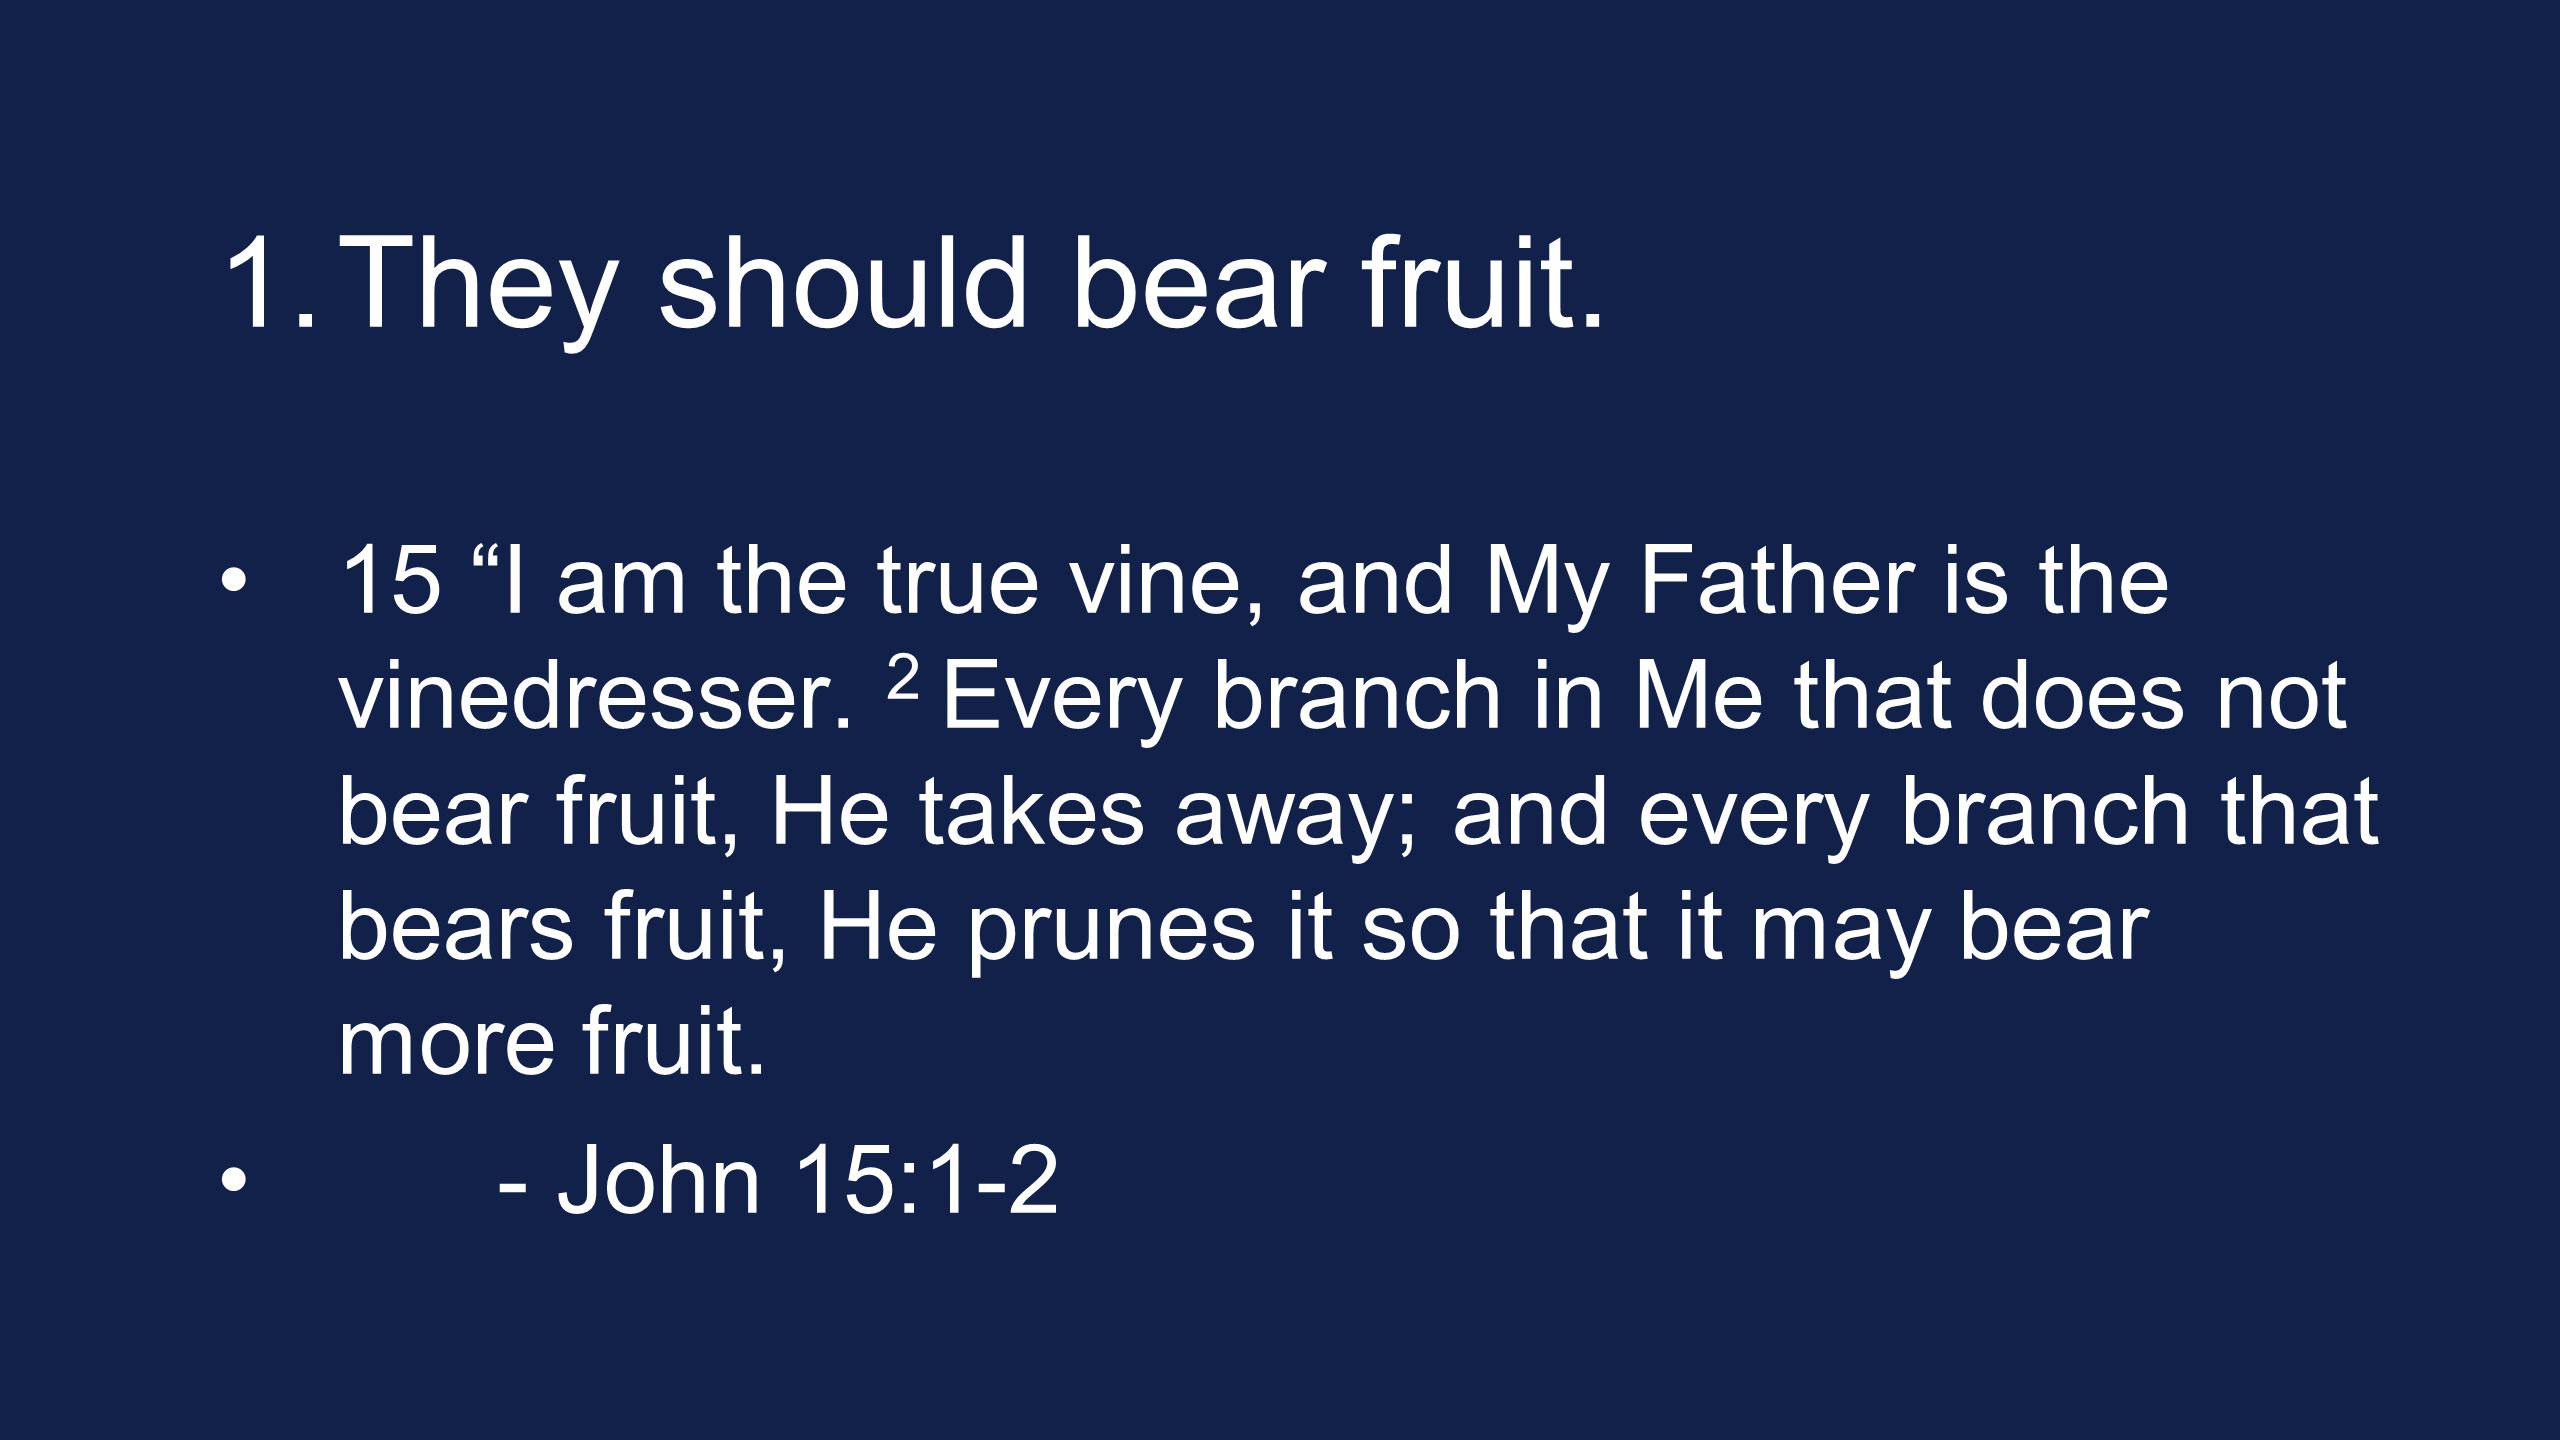 1. They should bear fruit. 15 I am the true vine, and My Father is the vinedresser.